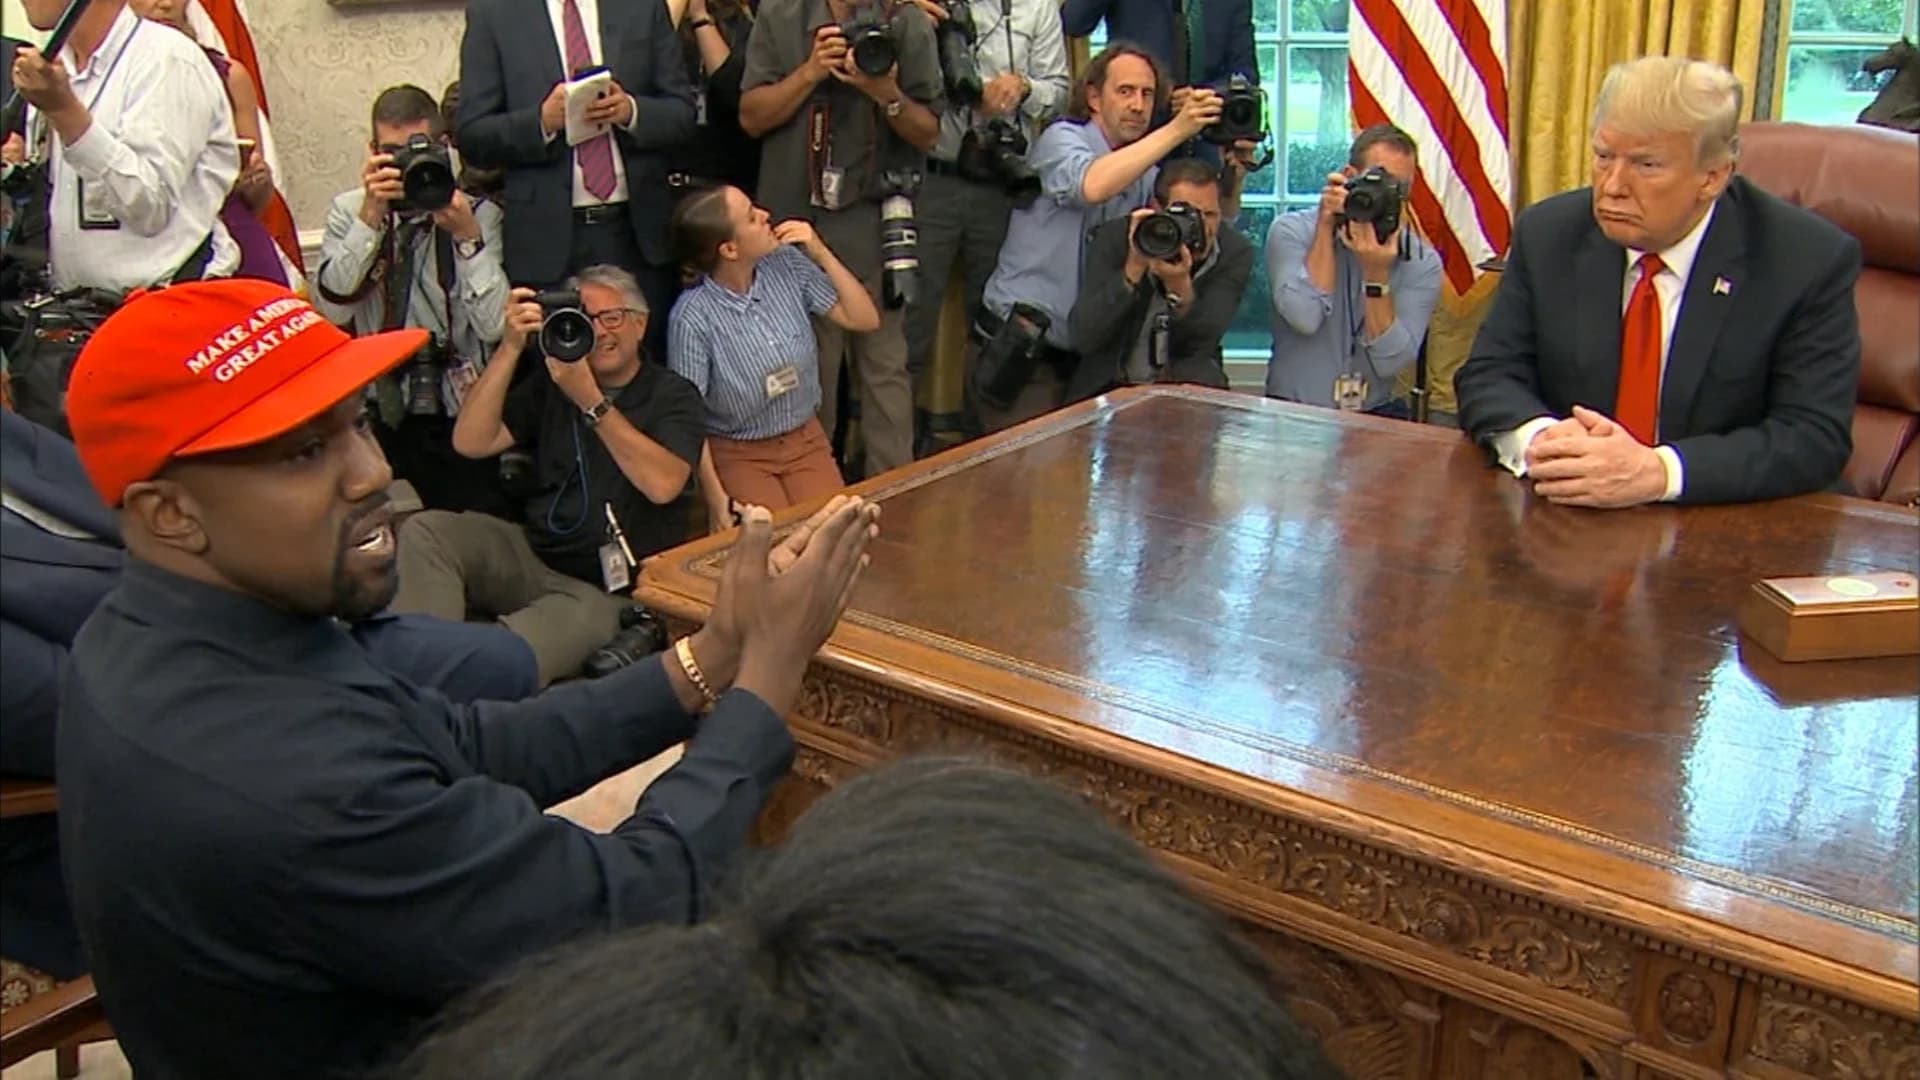 Kanye West, in 'MAGA' hat, delivers surreal Oval Office show